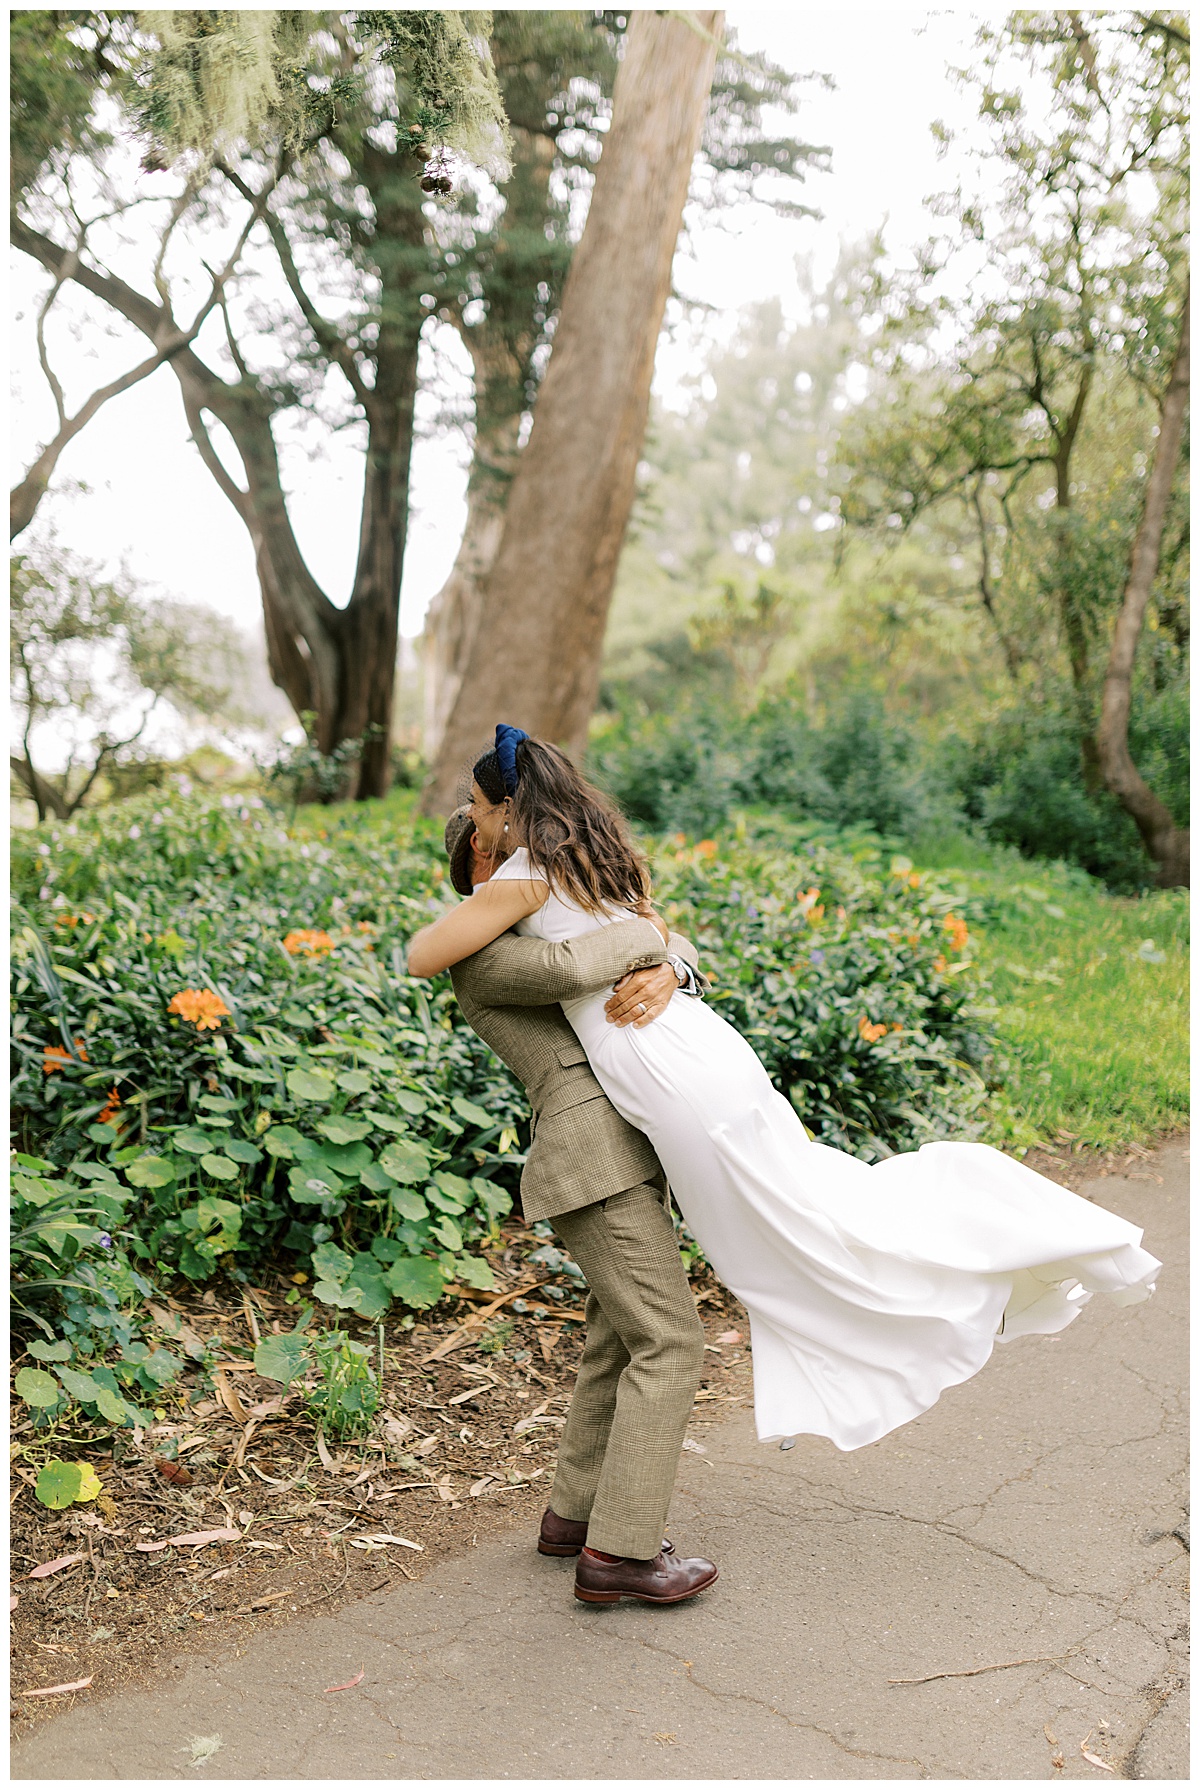 Sanya and Leann's couple's portraits after their charming SF City Hall wedding ceremony